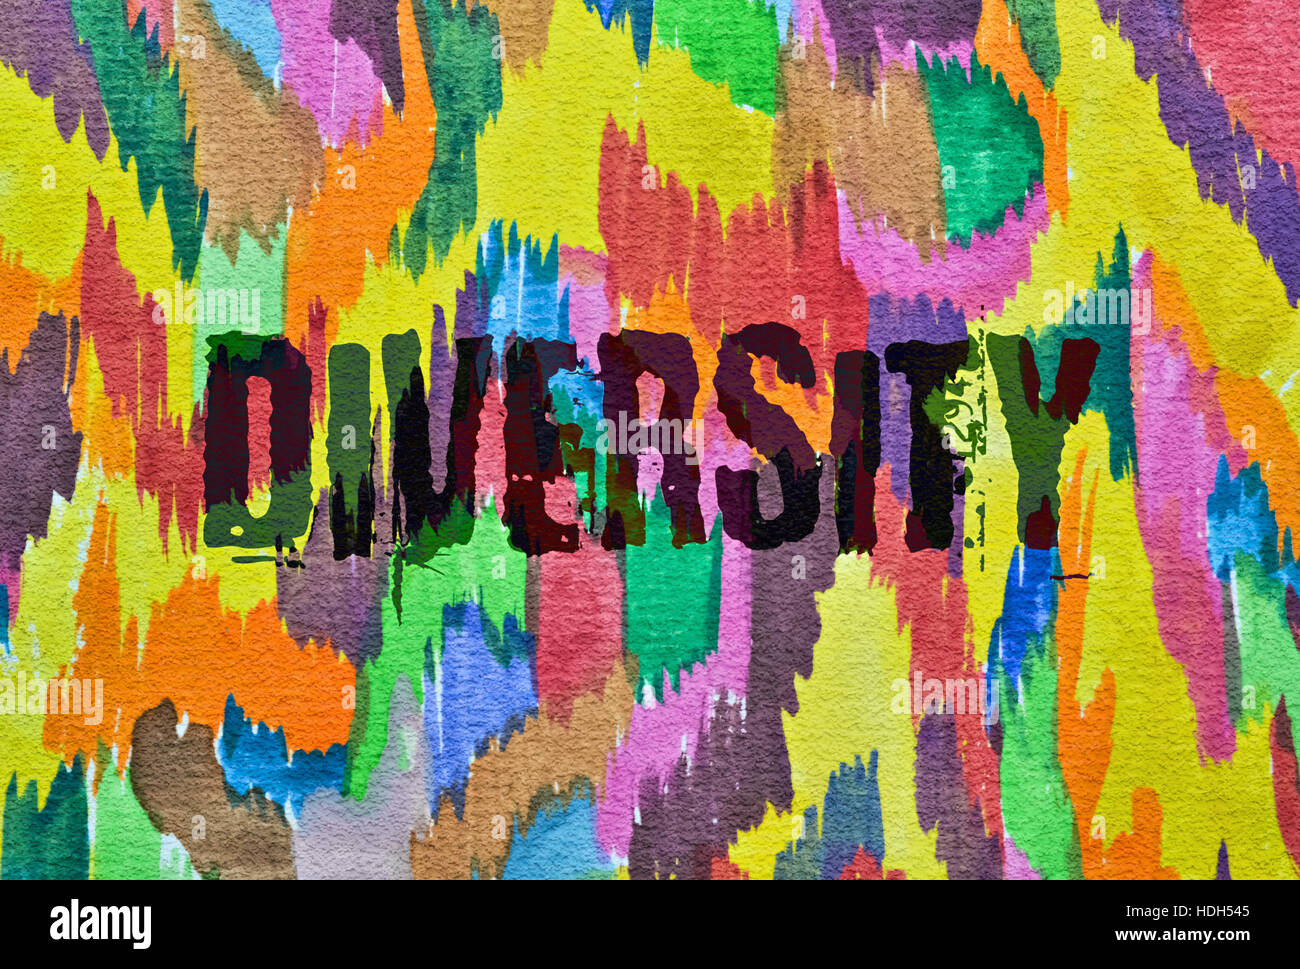 La diversité Word written on colorful abstract background Banque D'Images